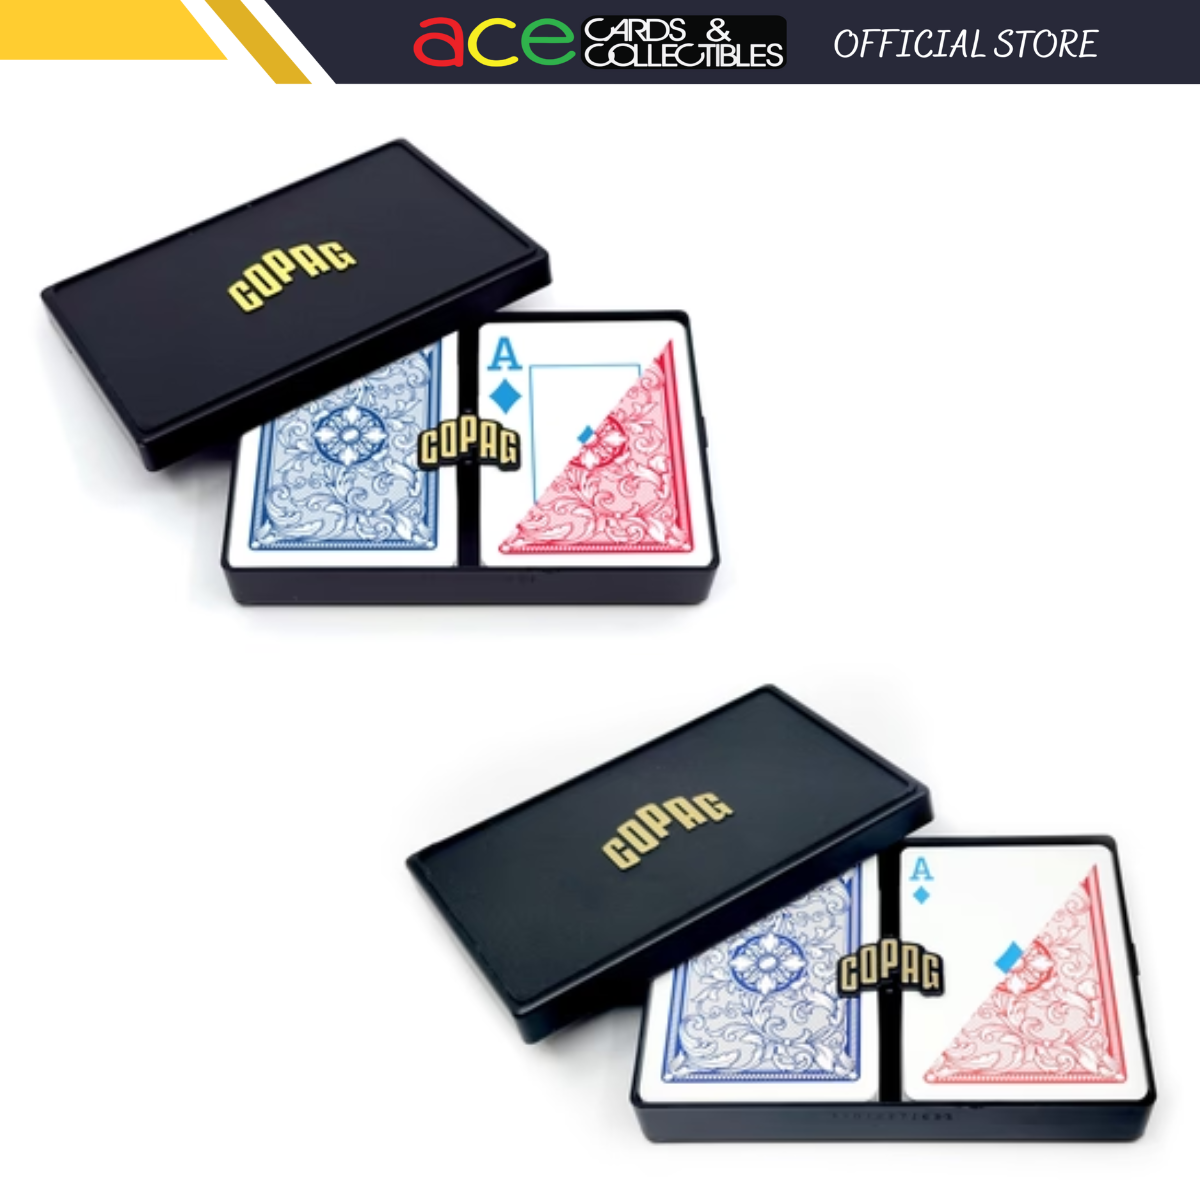 Copag Legacy 4-Color 100% Plastic Playing Cards - Poker Size Double Deck Set-Regular Index-Copag-Ace Cards & Collectibles